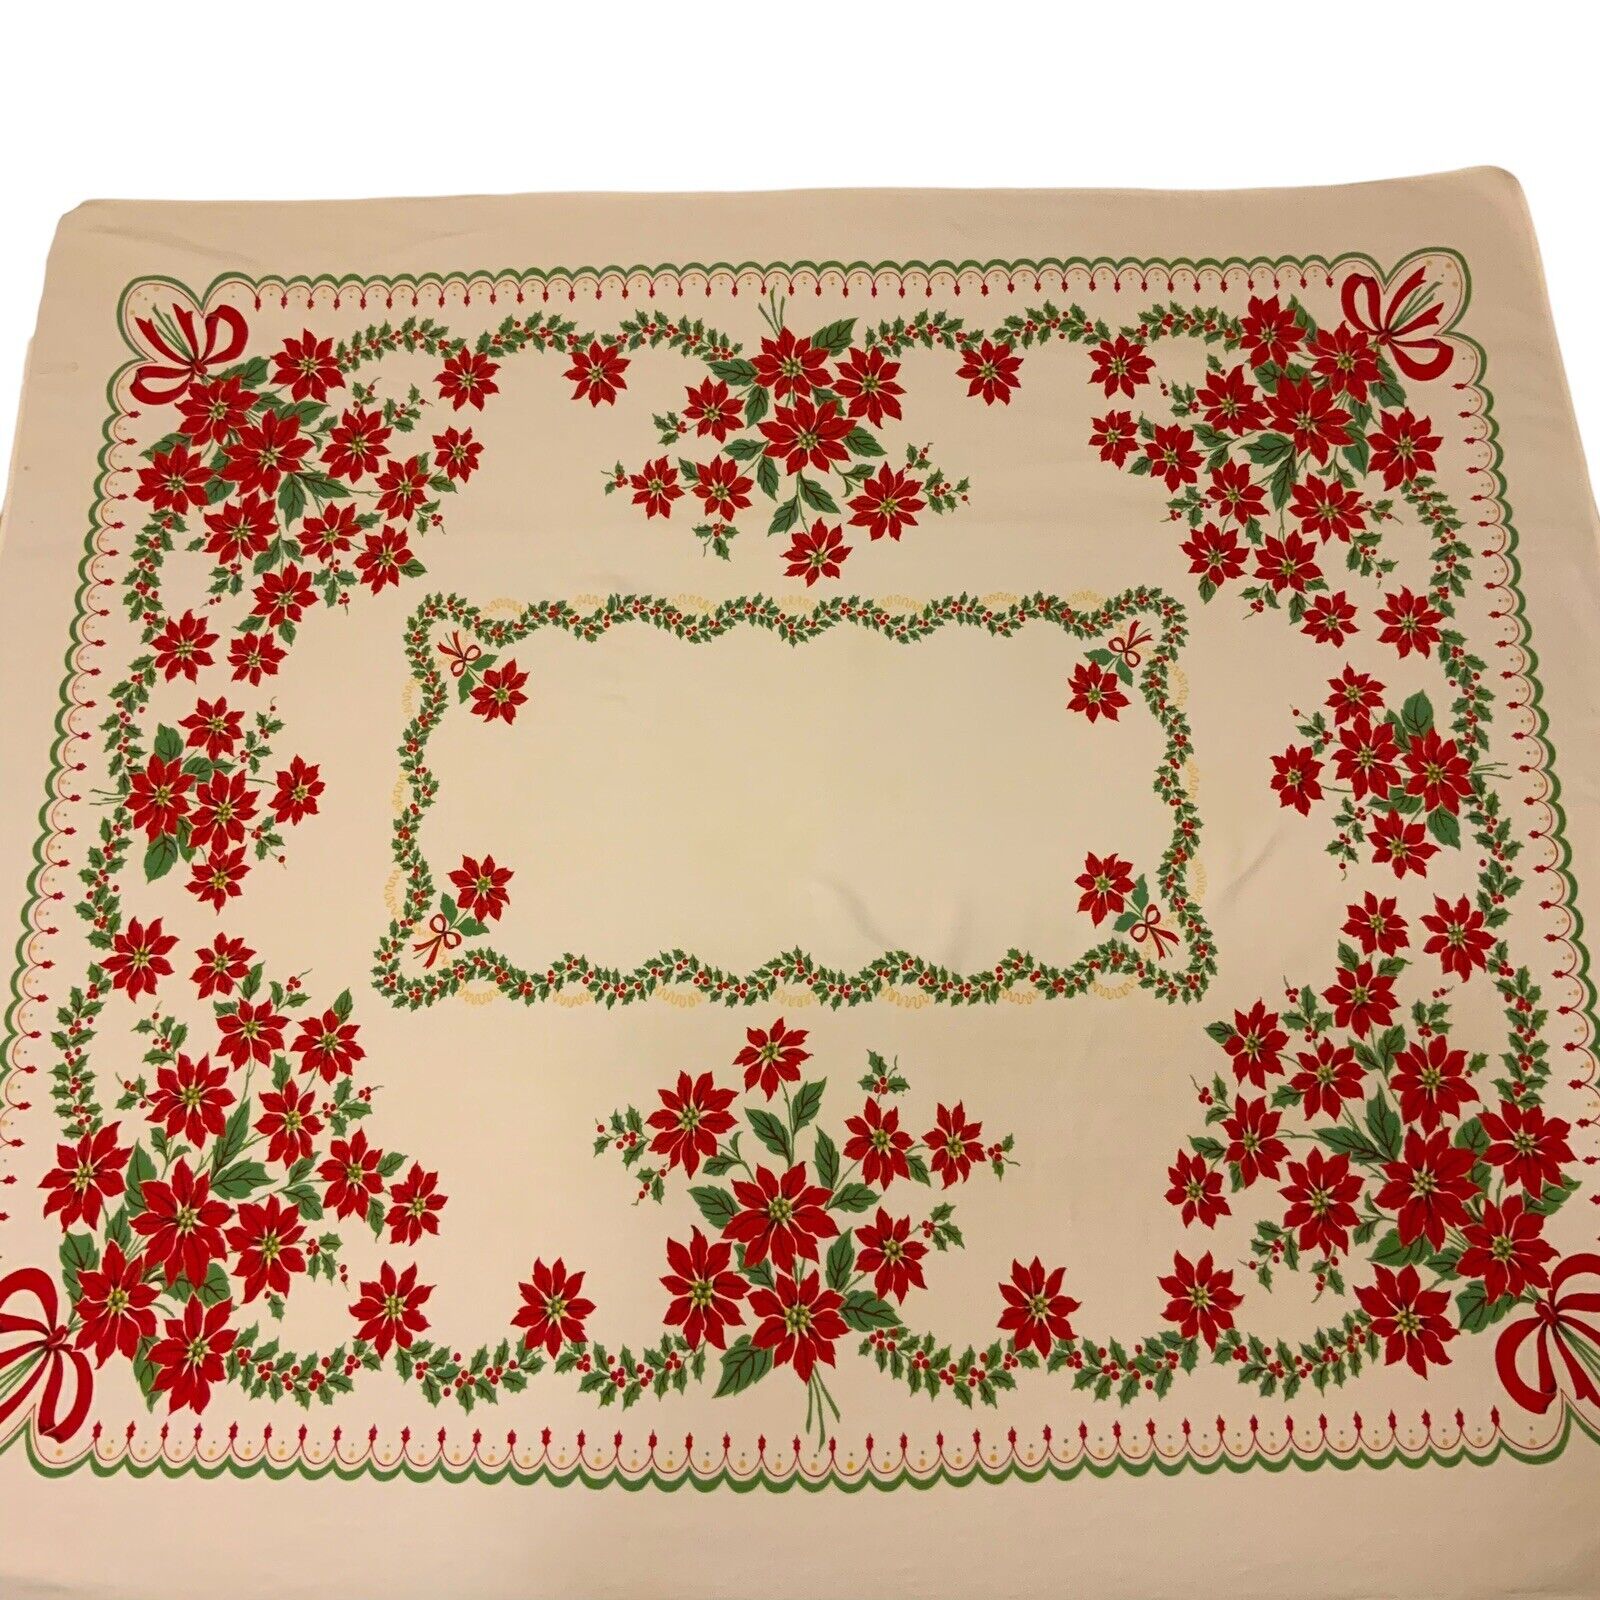 Christmas Tablecloth 52x56 White Red Poinsettias Holiday Table MCM Vintage